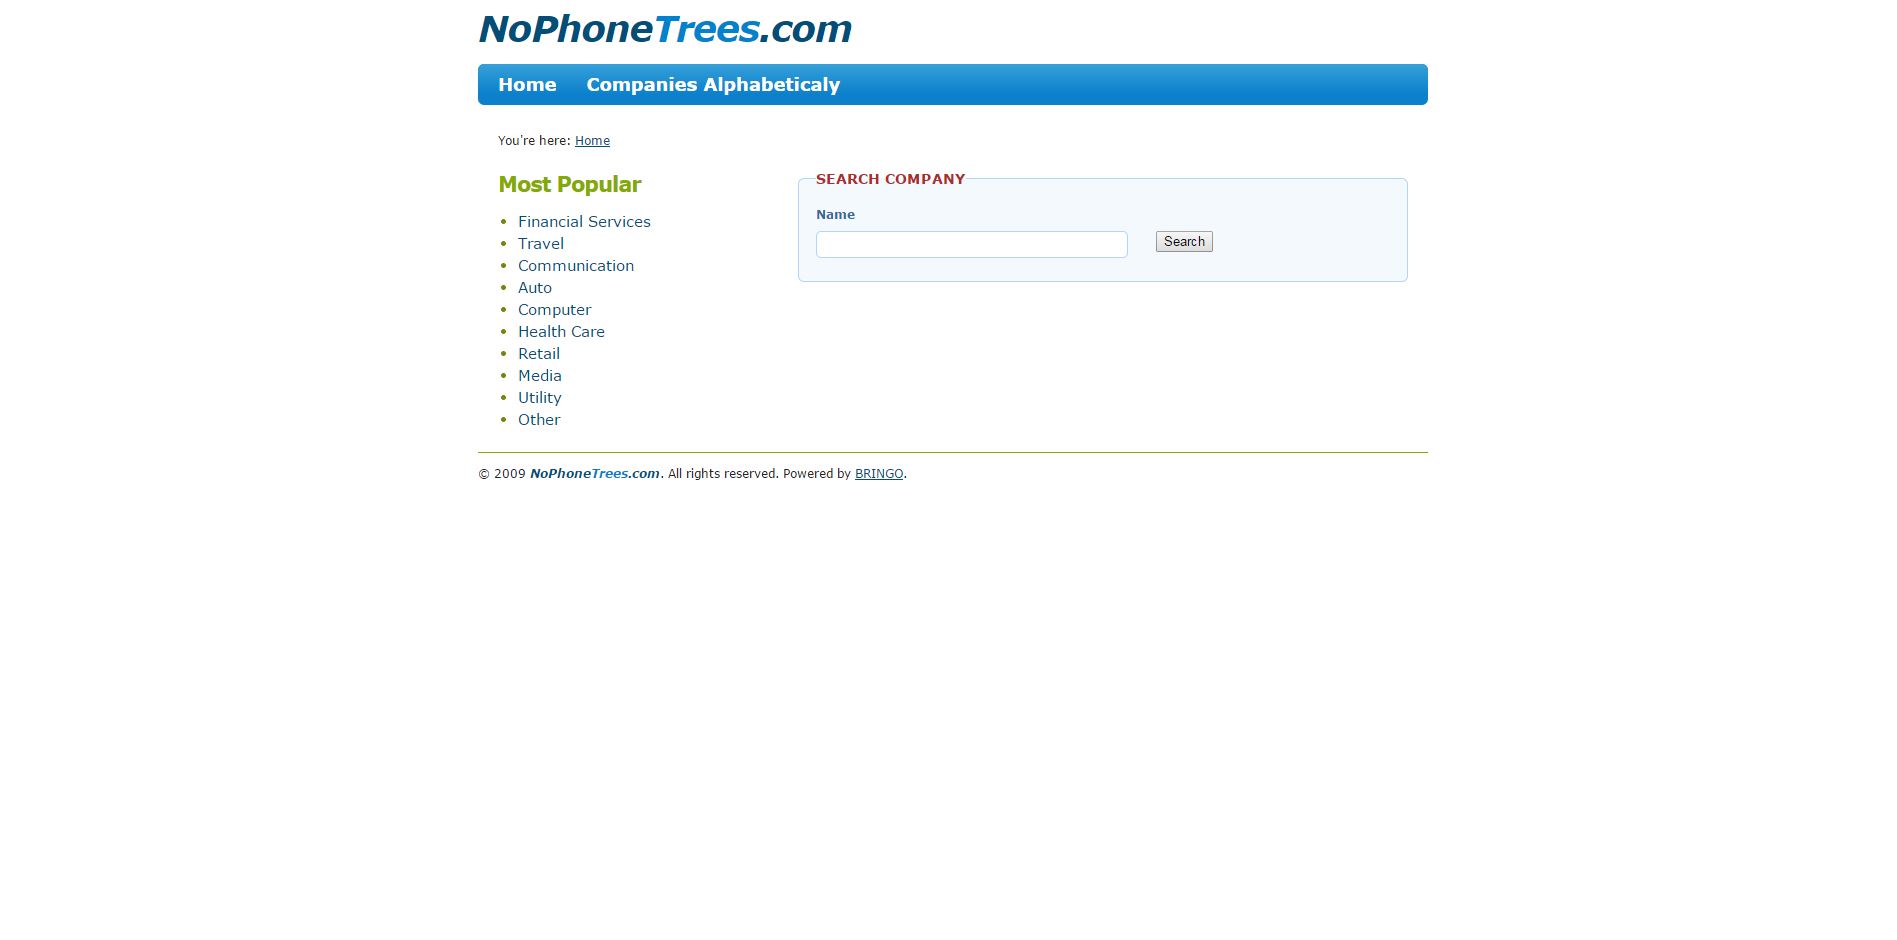 <a href="http://www.nophonetrees.com/" target="_blank">nophonetrees.com/</a> - Skip the phone trees and talk to a real person when you call a 1-800 number. Simply enter the business you are trying to reach, and the site does the rest. Call the number it gives you, and follow the steps on the screen. You will be talking to a real person in no time.